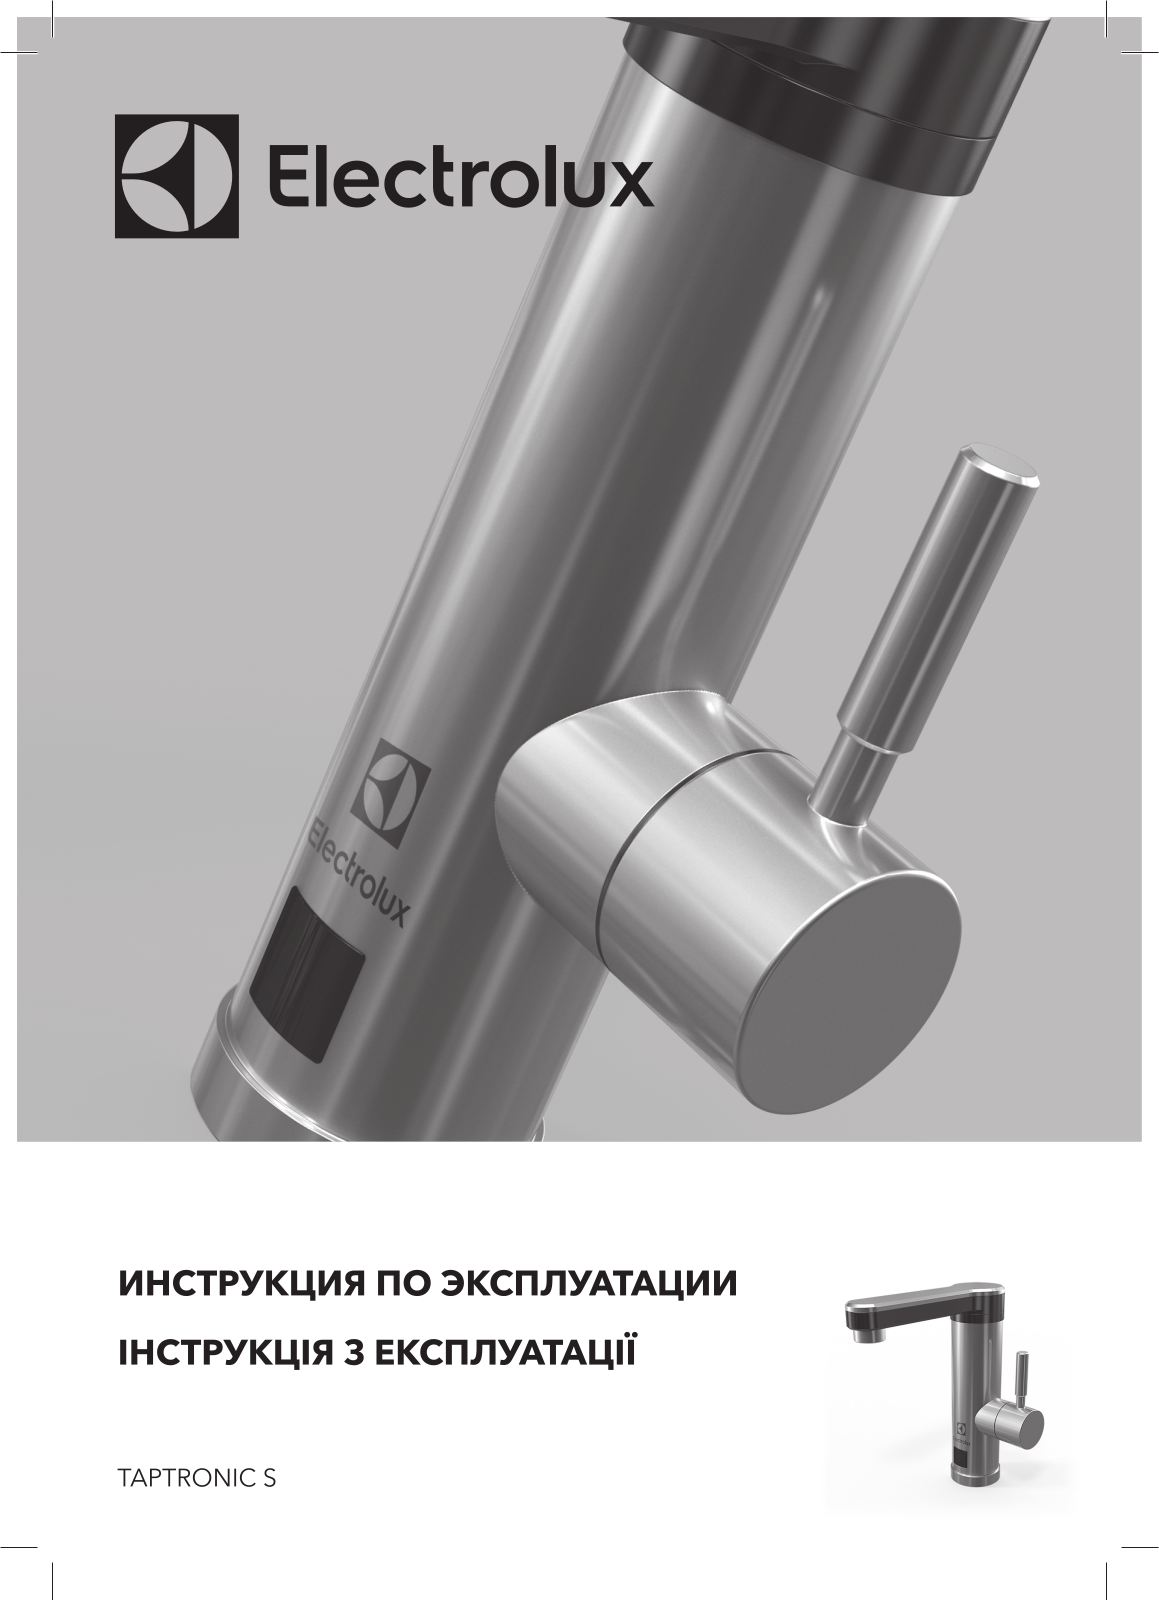 Electrolux Taptronic S User manual